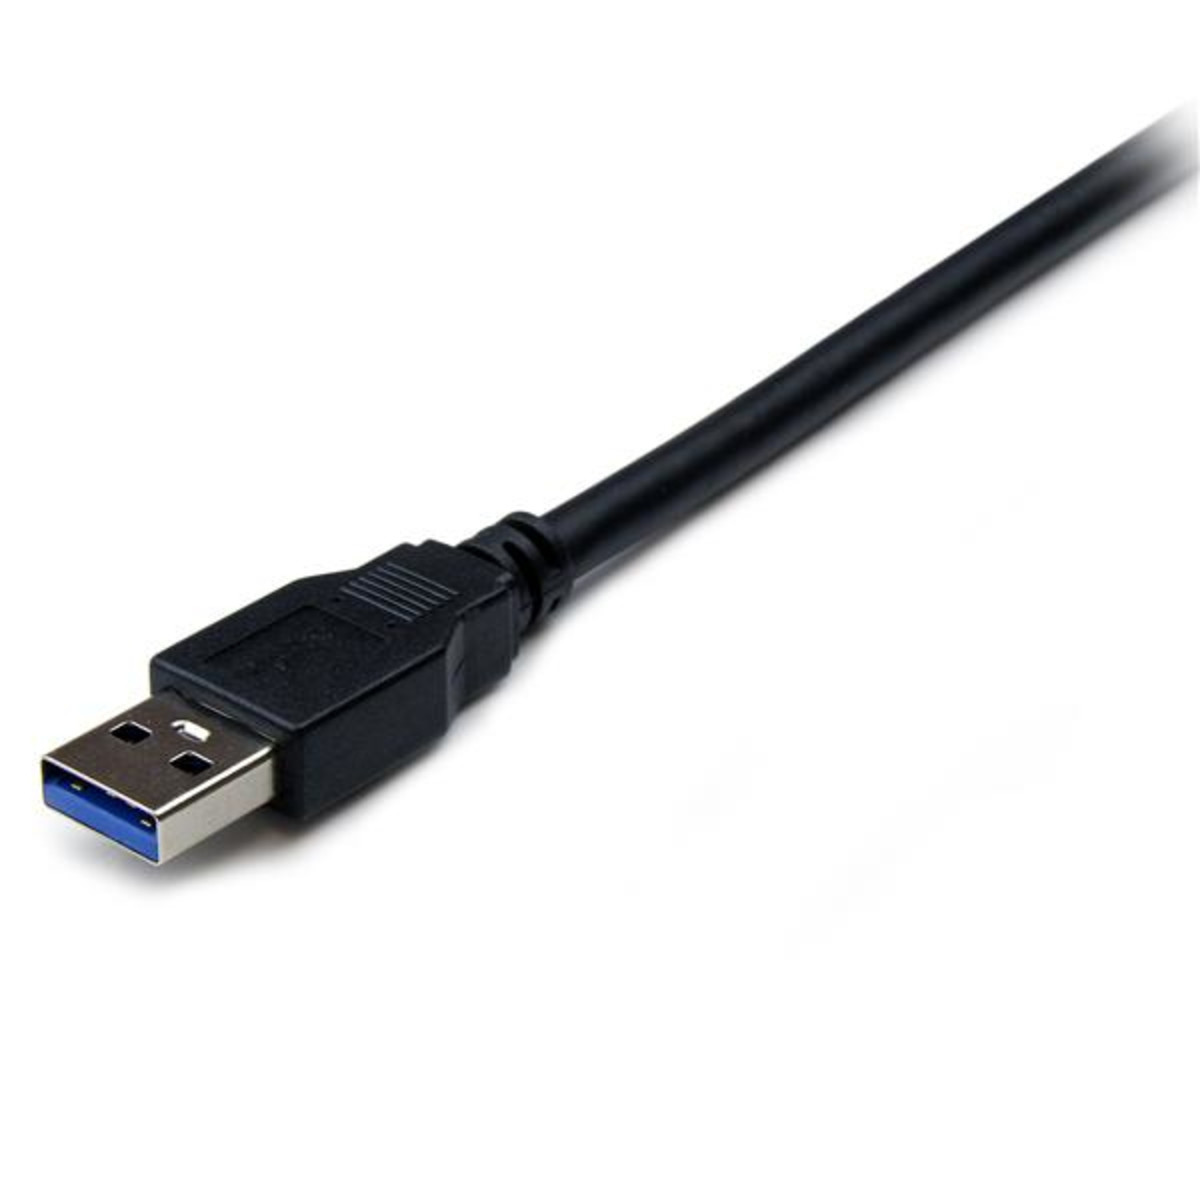 2m SS USB 3.0 Extension Cable